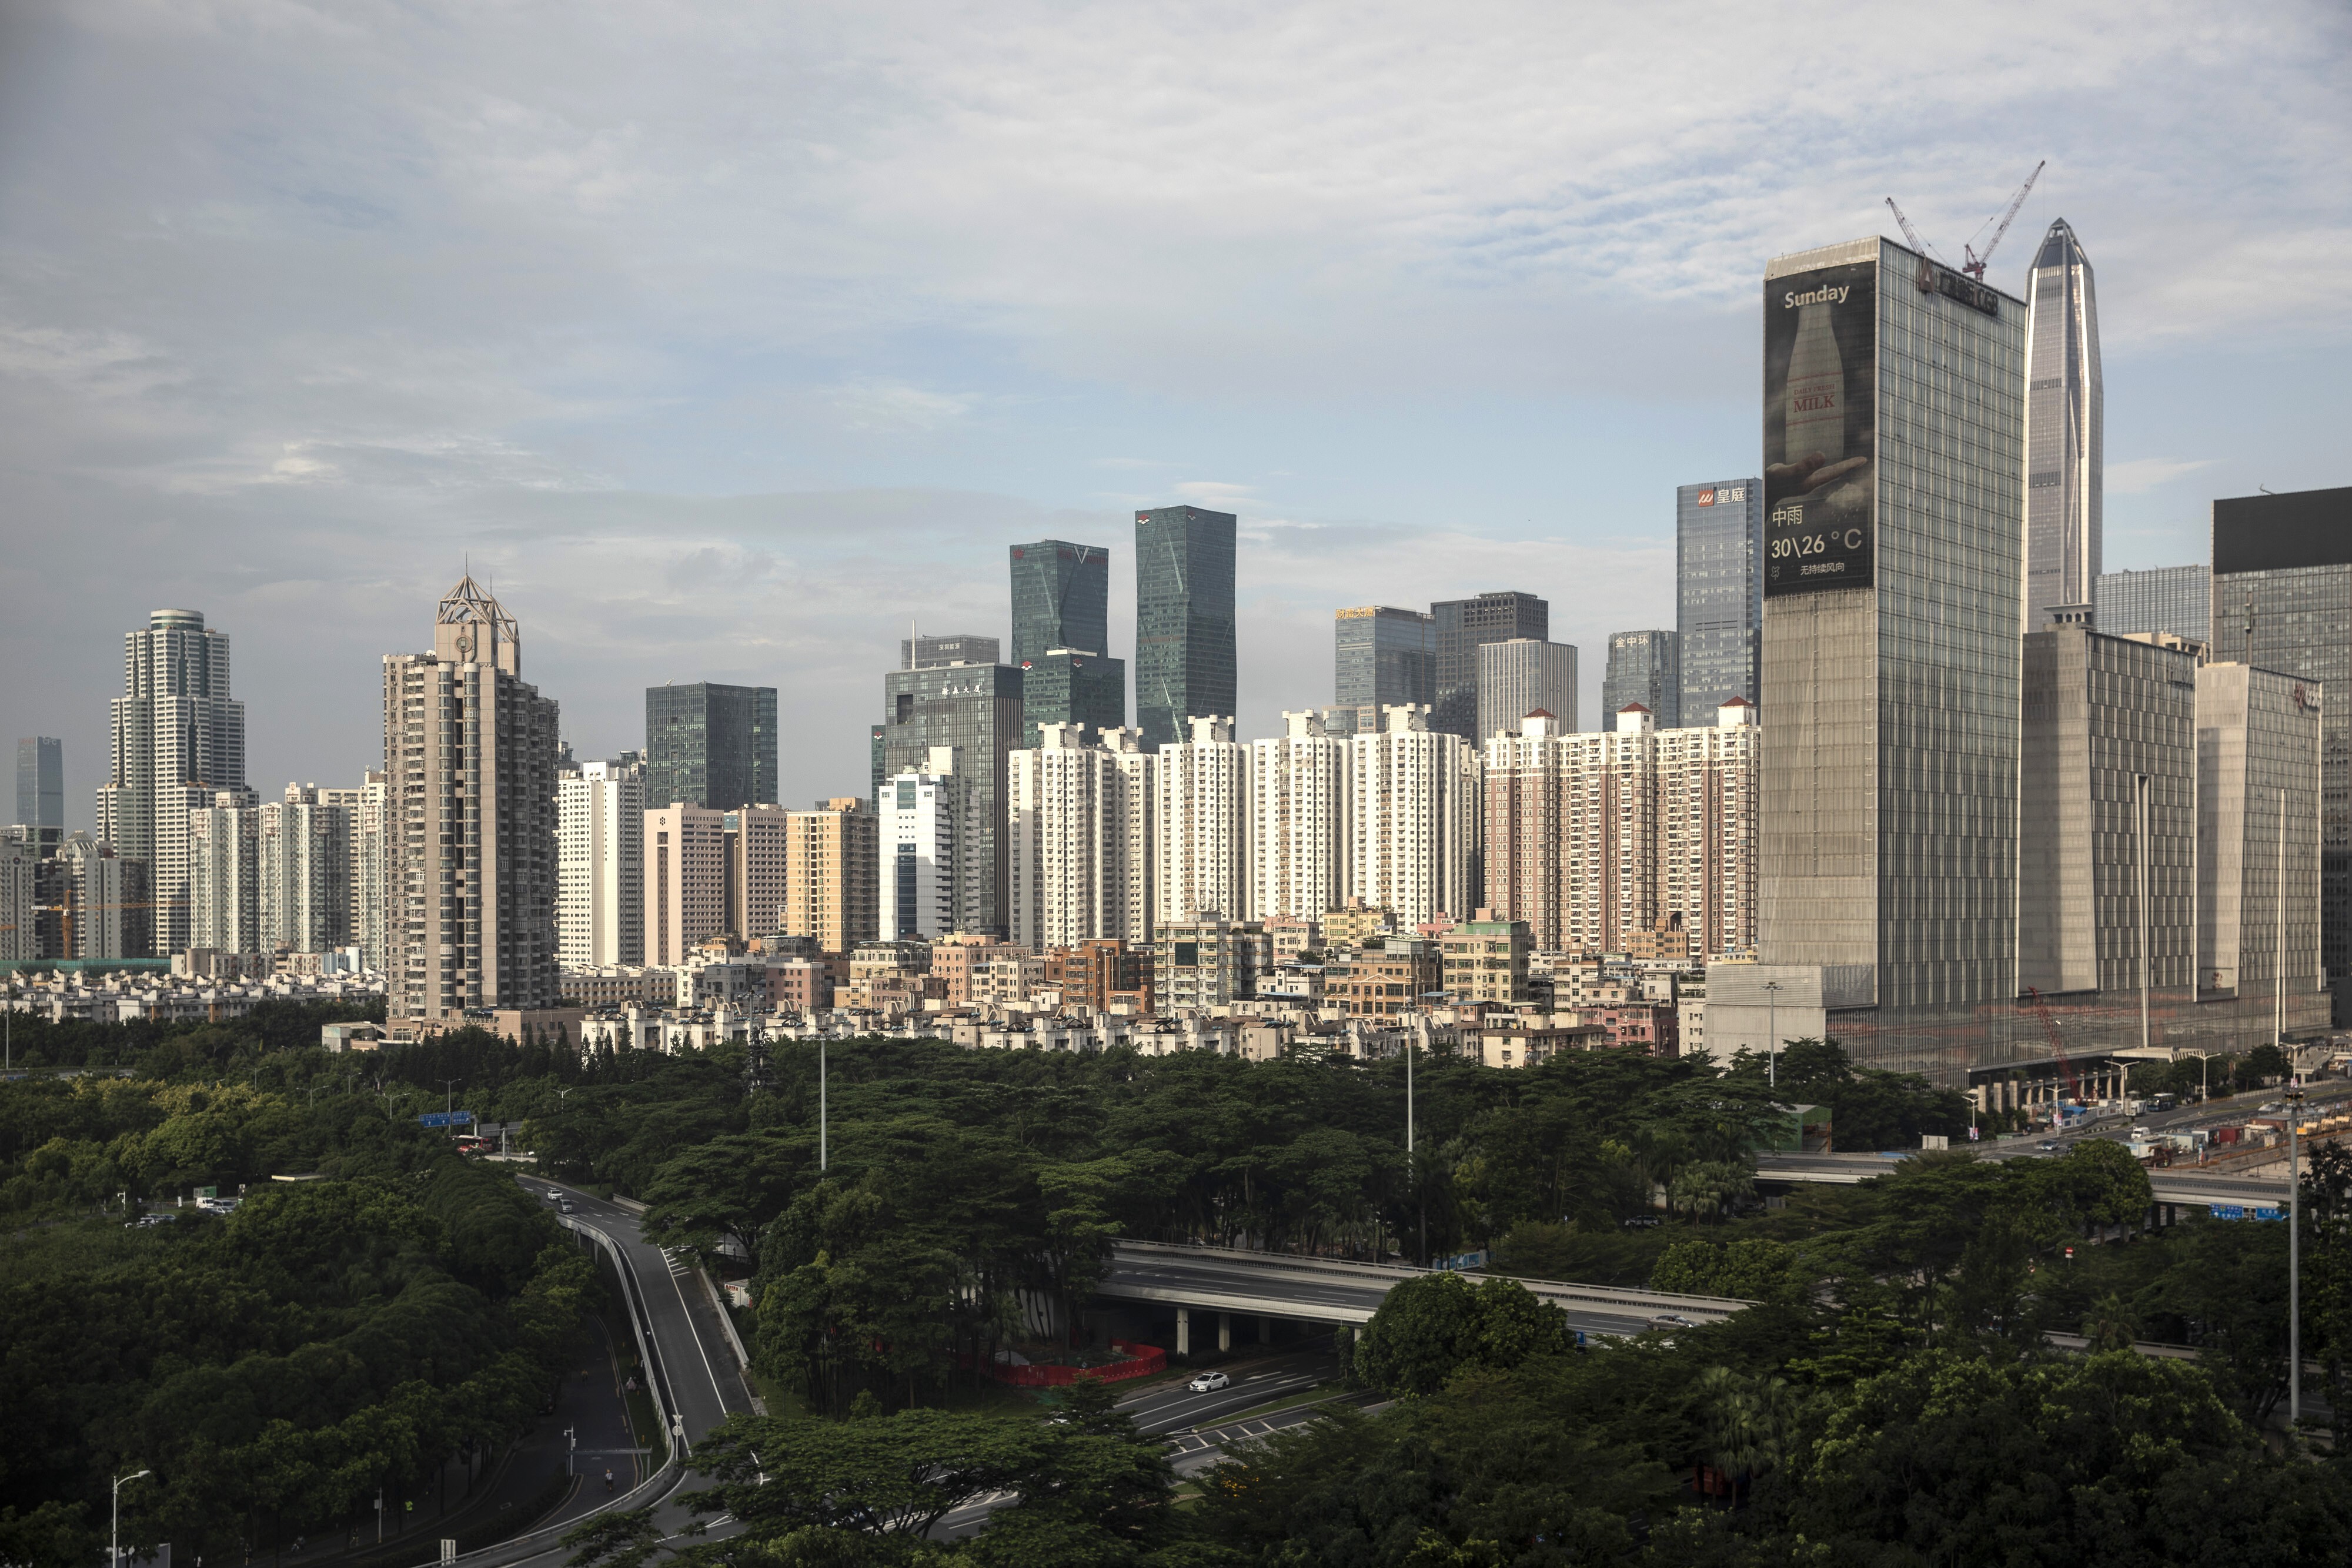 Buildings in Shenzhen on Sunday, August 4, 2019. Photo: Bloomberg